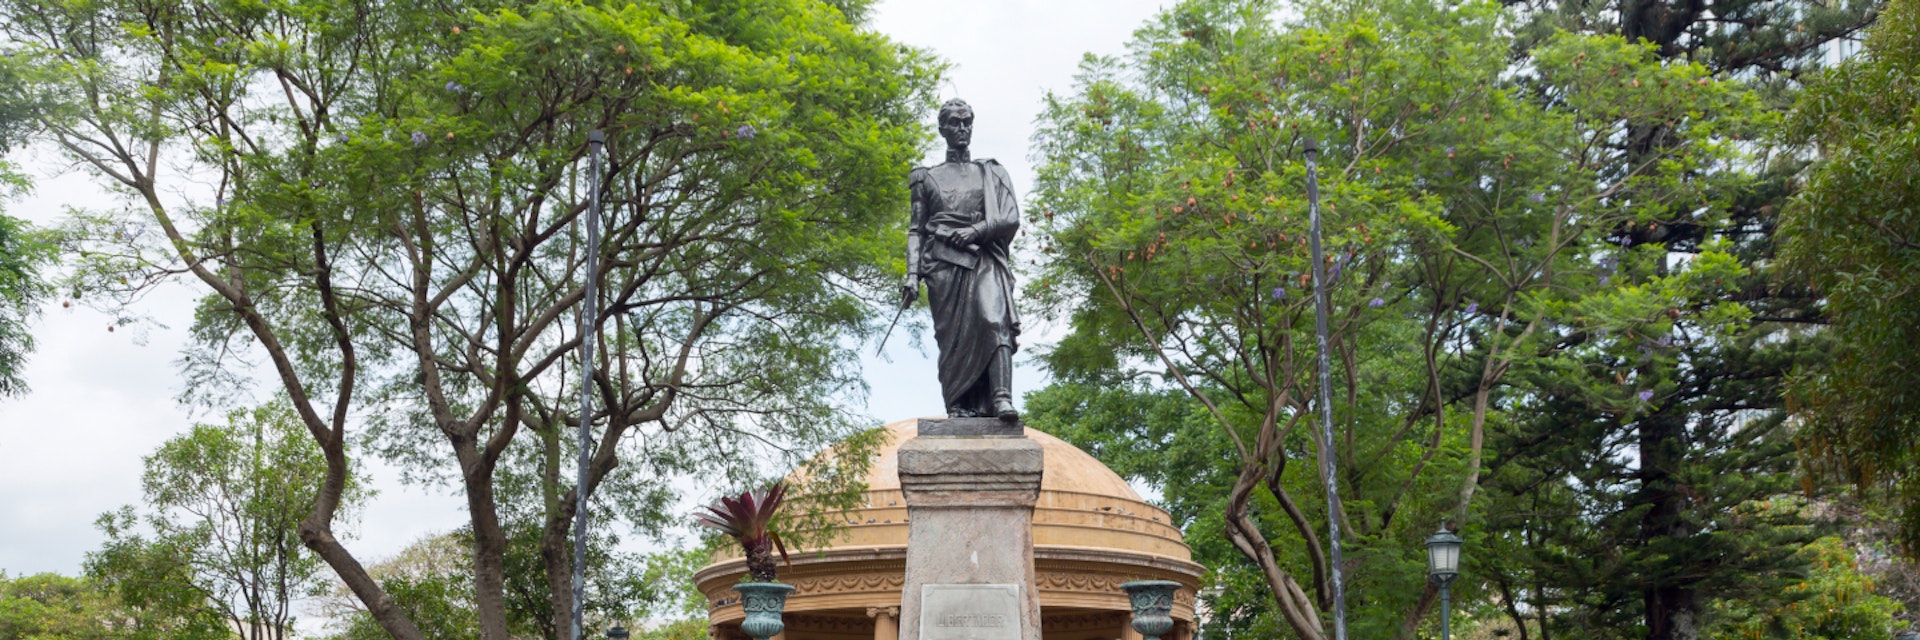 SAN JOSE, COSTA RICA - MAY 17: Simon Bolivar square, monument to Simon Bolivar in San Jose, Costa Rica on May 17, 2014. The monument is located in the central part of San Jose city; Shutterstock ID 383541232; Your name (First / Last): Josh Vogel; GL account no.: 56530; Netsuite department name: Online Design; Full Product or Project name including edition: Digital Content/Sights